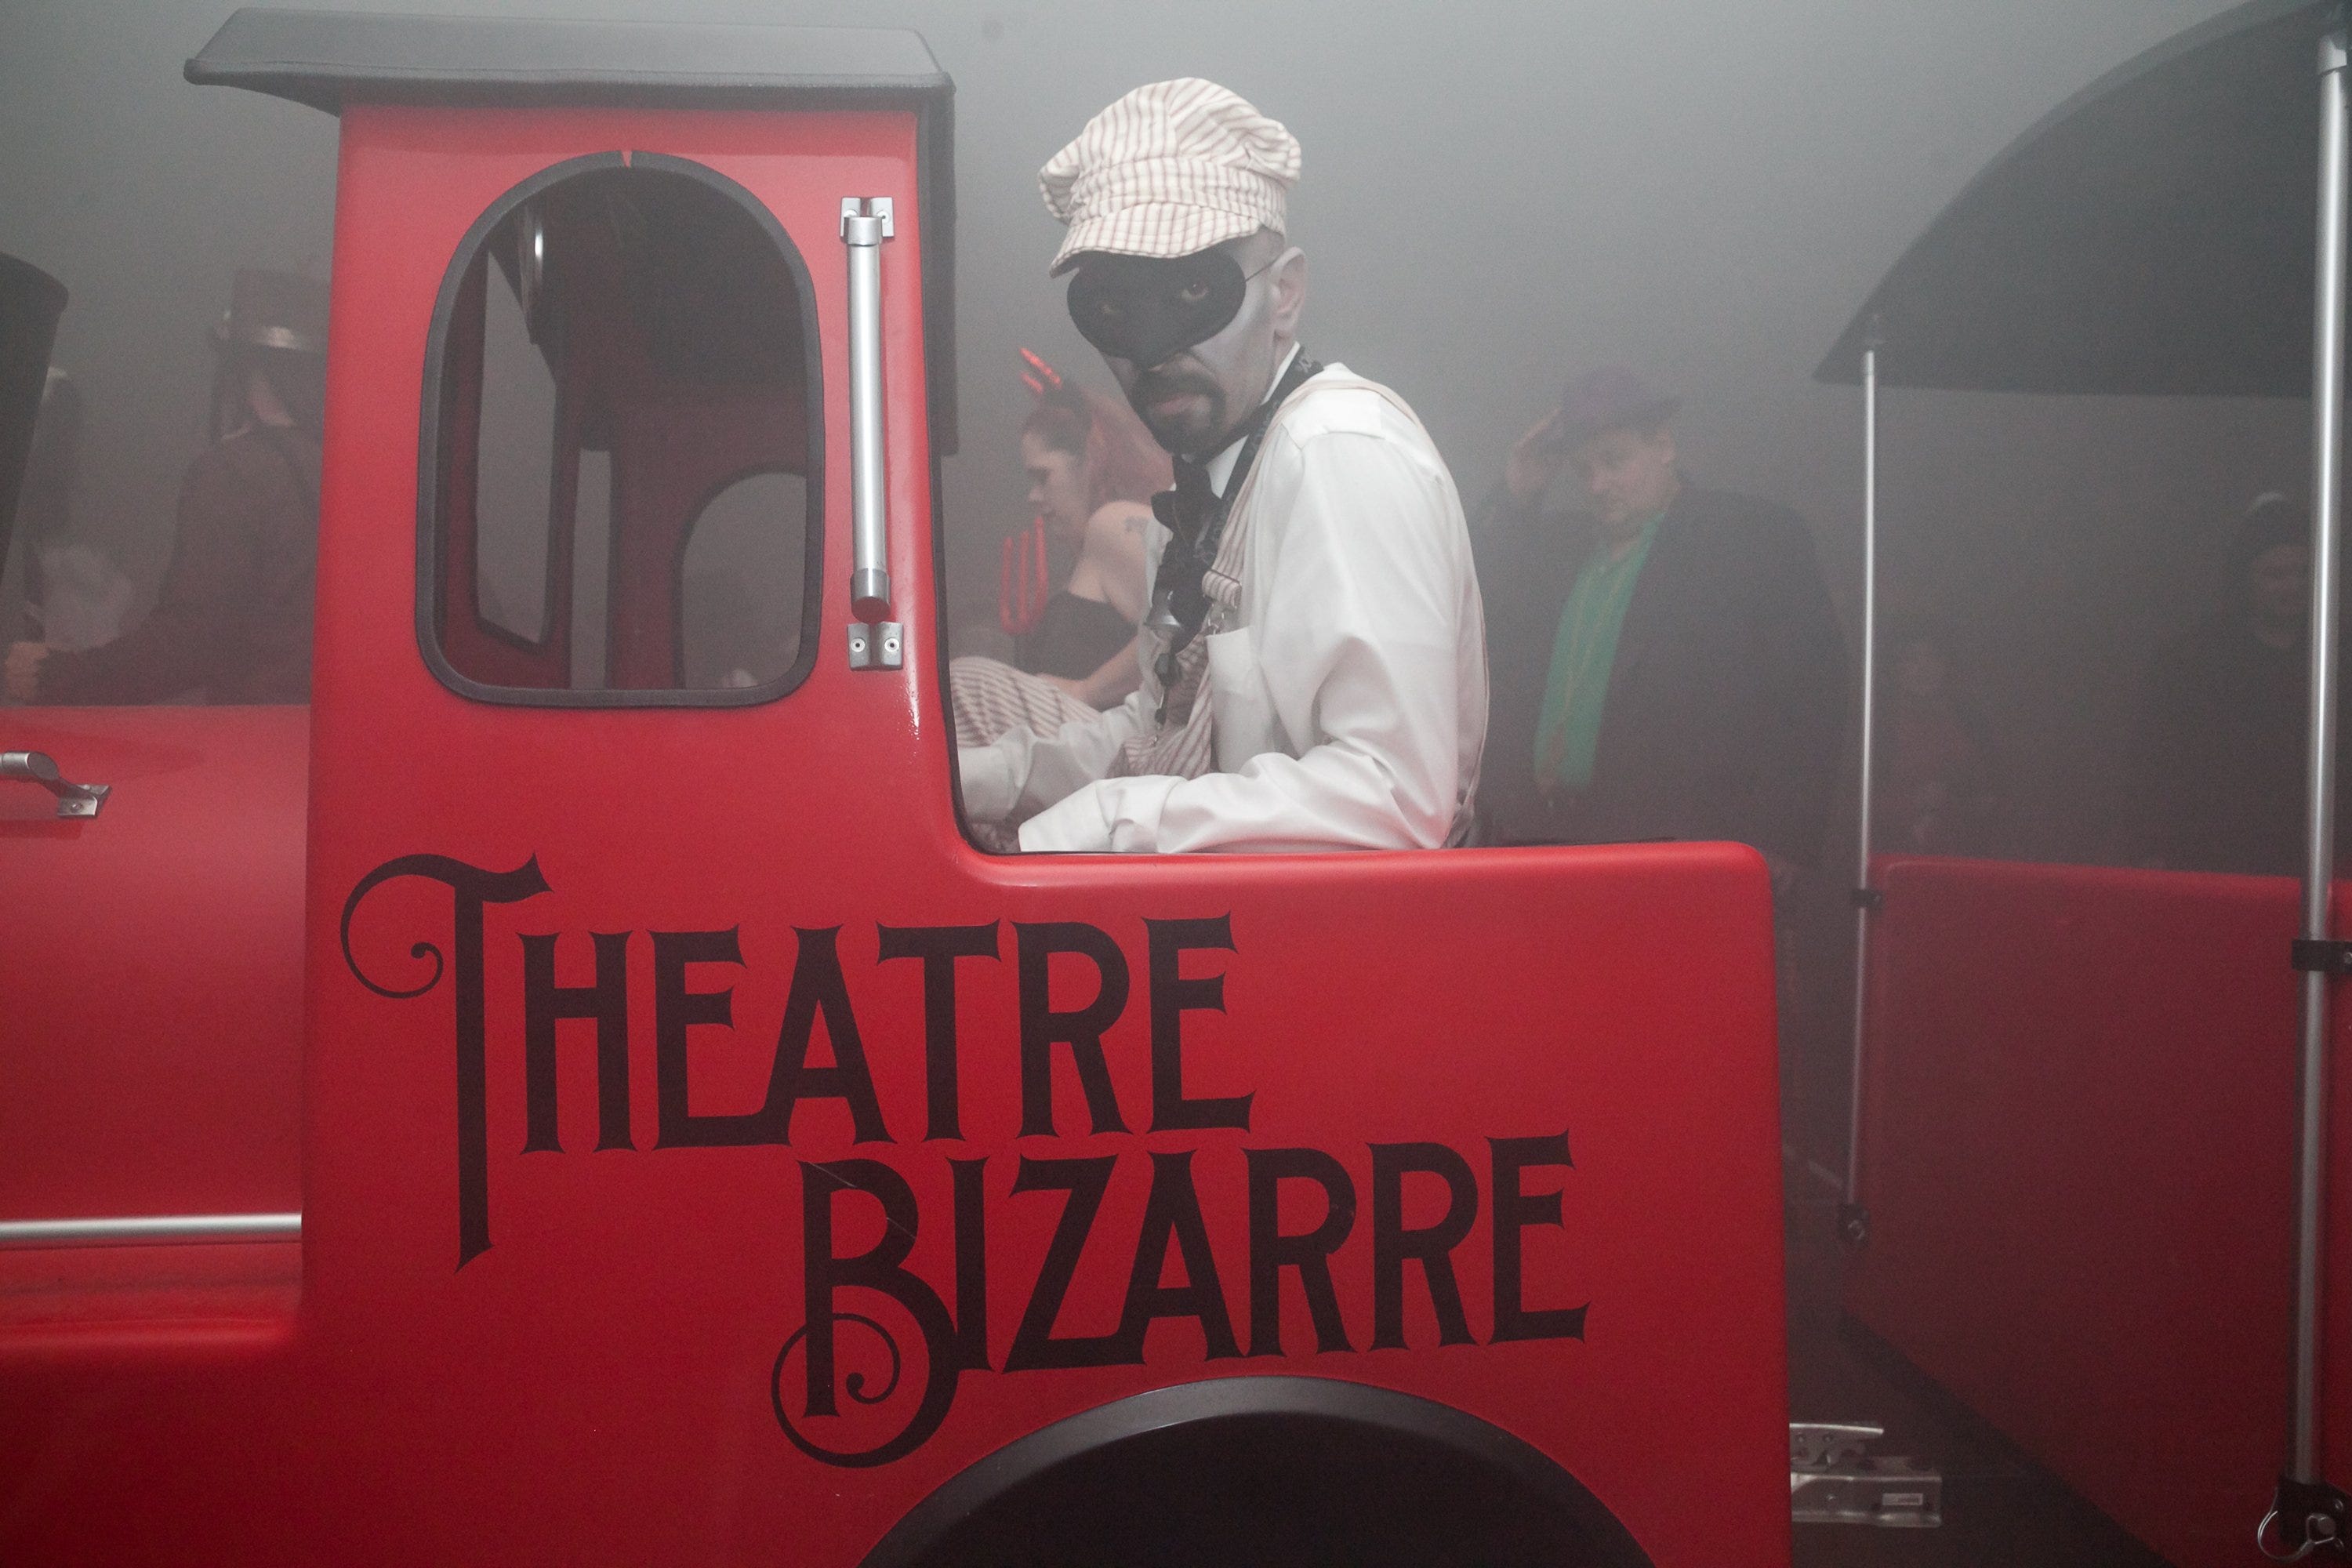 The Ghost Train takes guests on a fast-paced, foggy ride during the Theatre Bizarre masquerade ball.